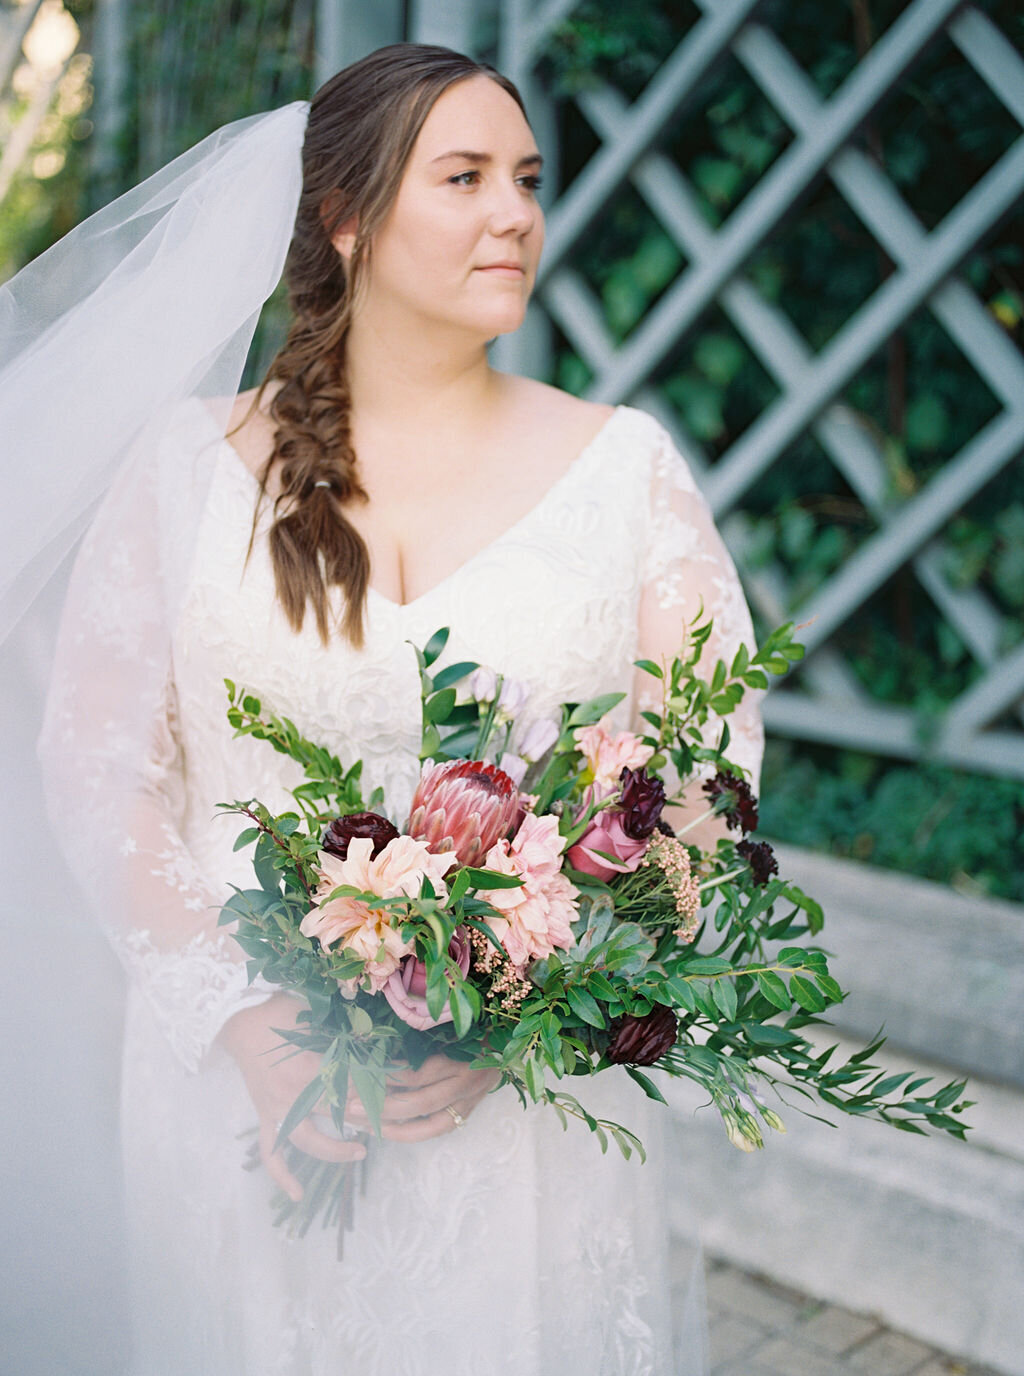 West Lafayette ecclectic wedding with rich colors by Burman Photography110